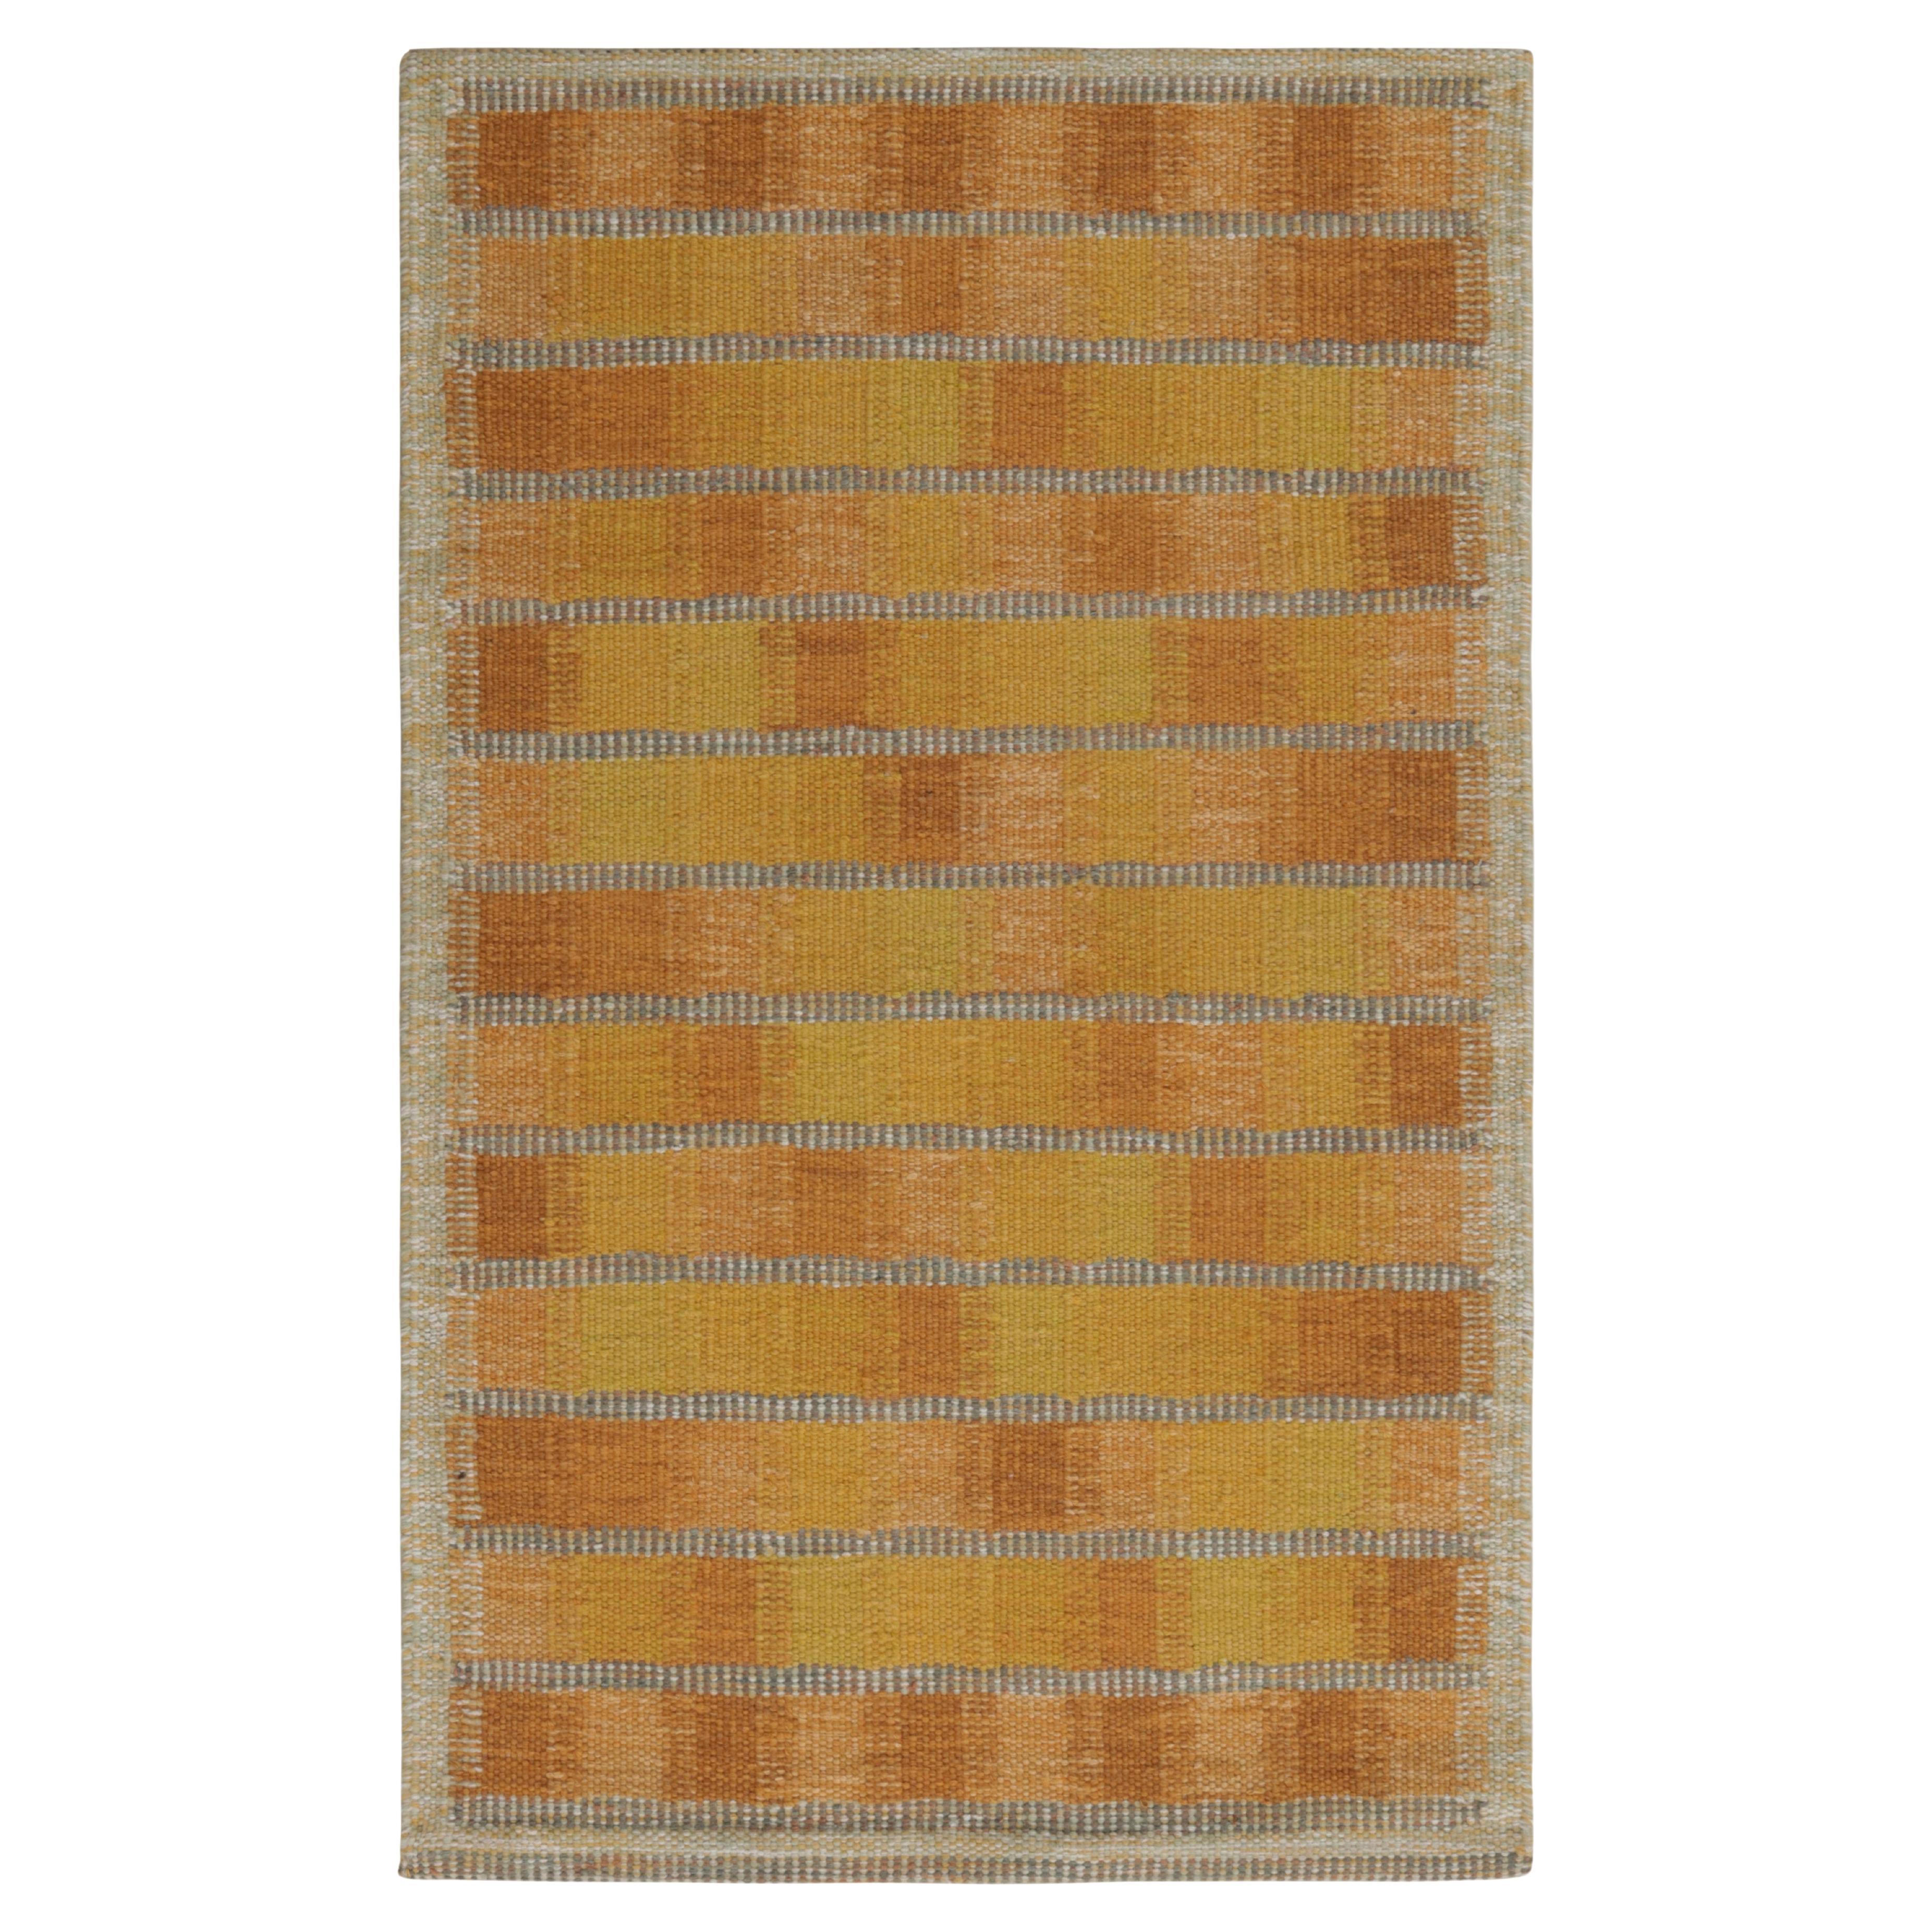 Rug & Kilim’s Scandinavian Style Rug in Gold and Pink, with Geometric Patterns